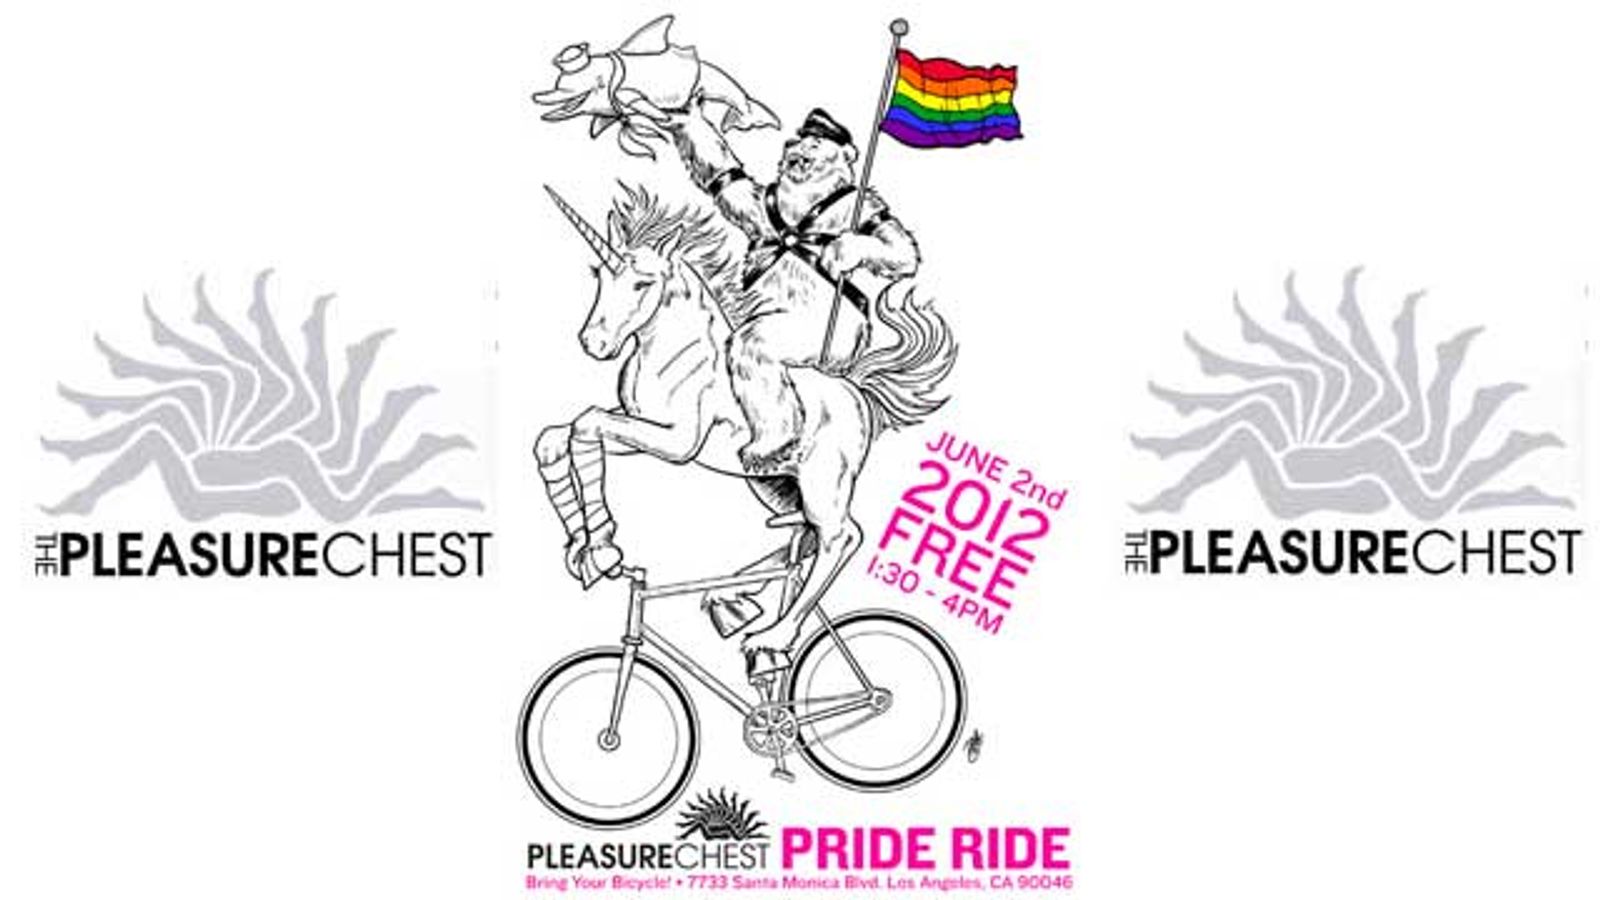 On Saturday, Why Not Take Pleasure Chest's Pride Ride?-UPDATE